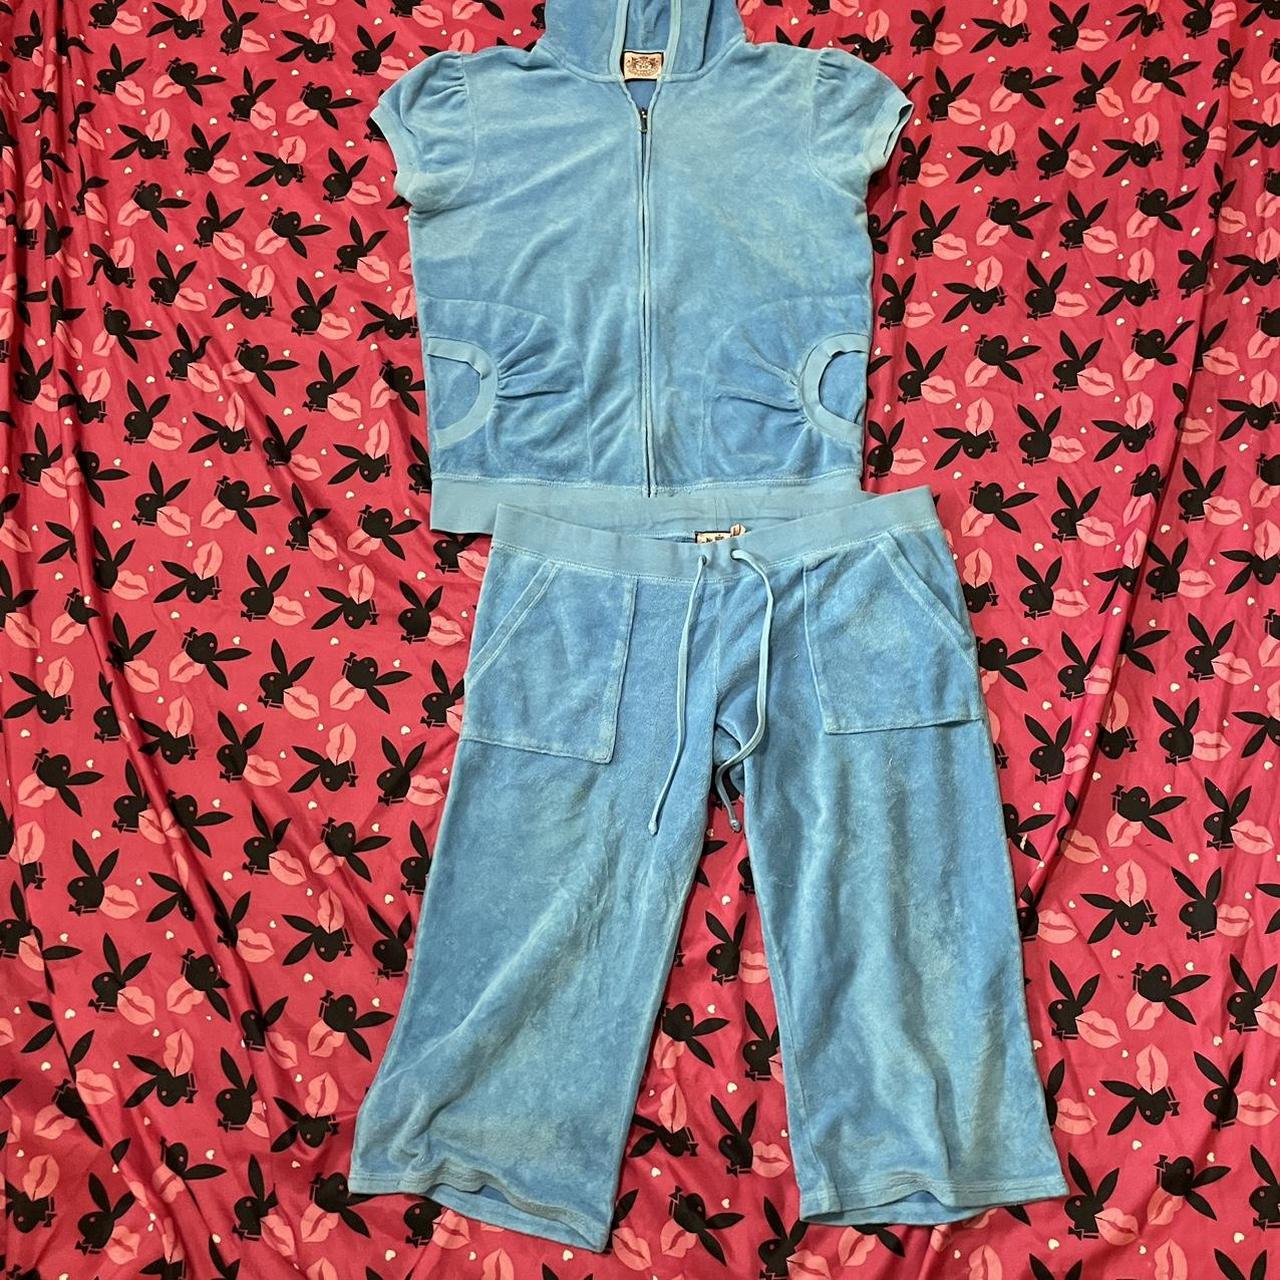 Juicy Couture Women's Blue and Pink Jumpsuit | Depop